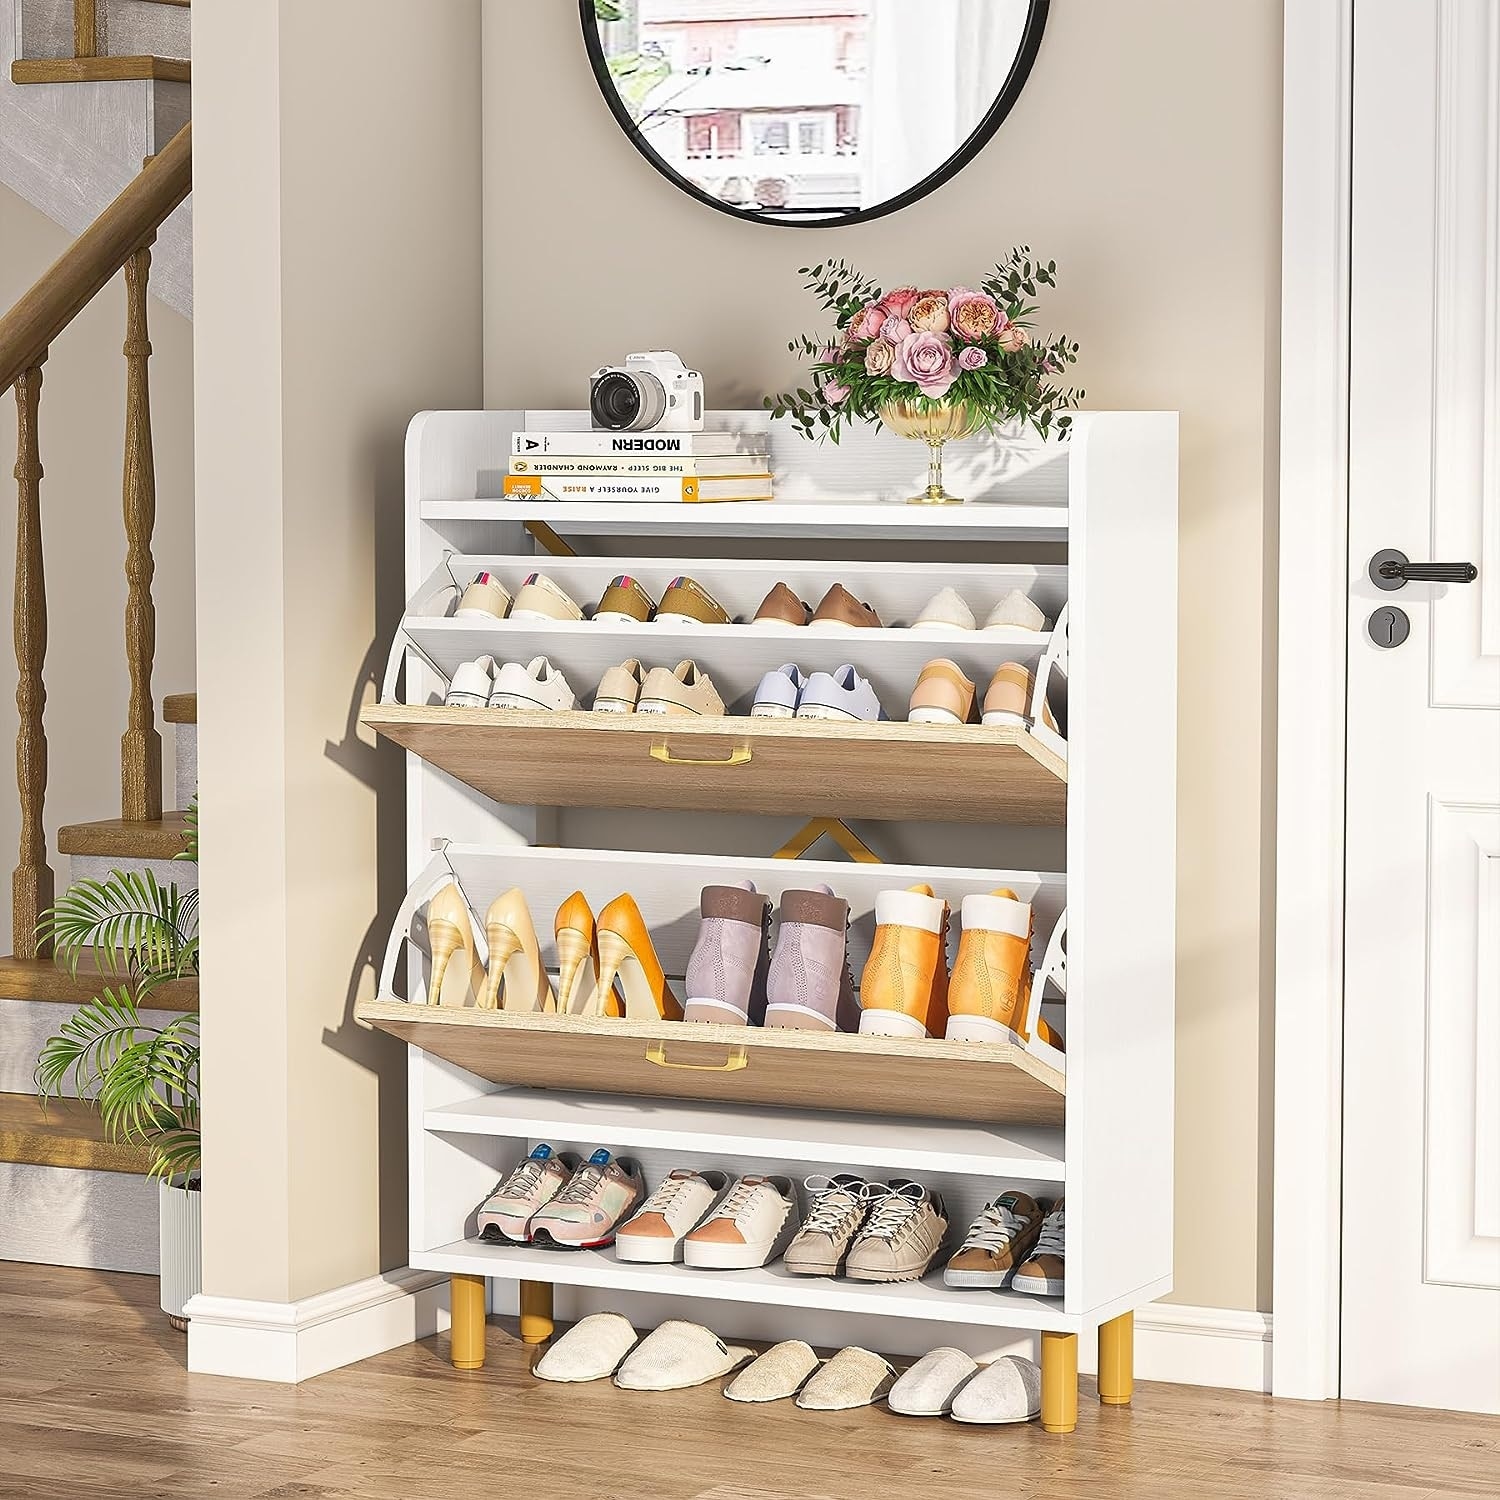 https://ak1.ostkcdn.com/images/products/is/images/direct/394950e34fa25244f1d72cefe048bff60a92e398/Shoe-Storage-Cabinet%2C-24-Pair-Shoe-Storage-with-2-Drawers%2C-Brown-White.jpg